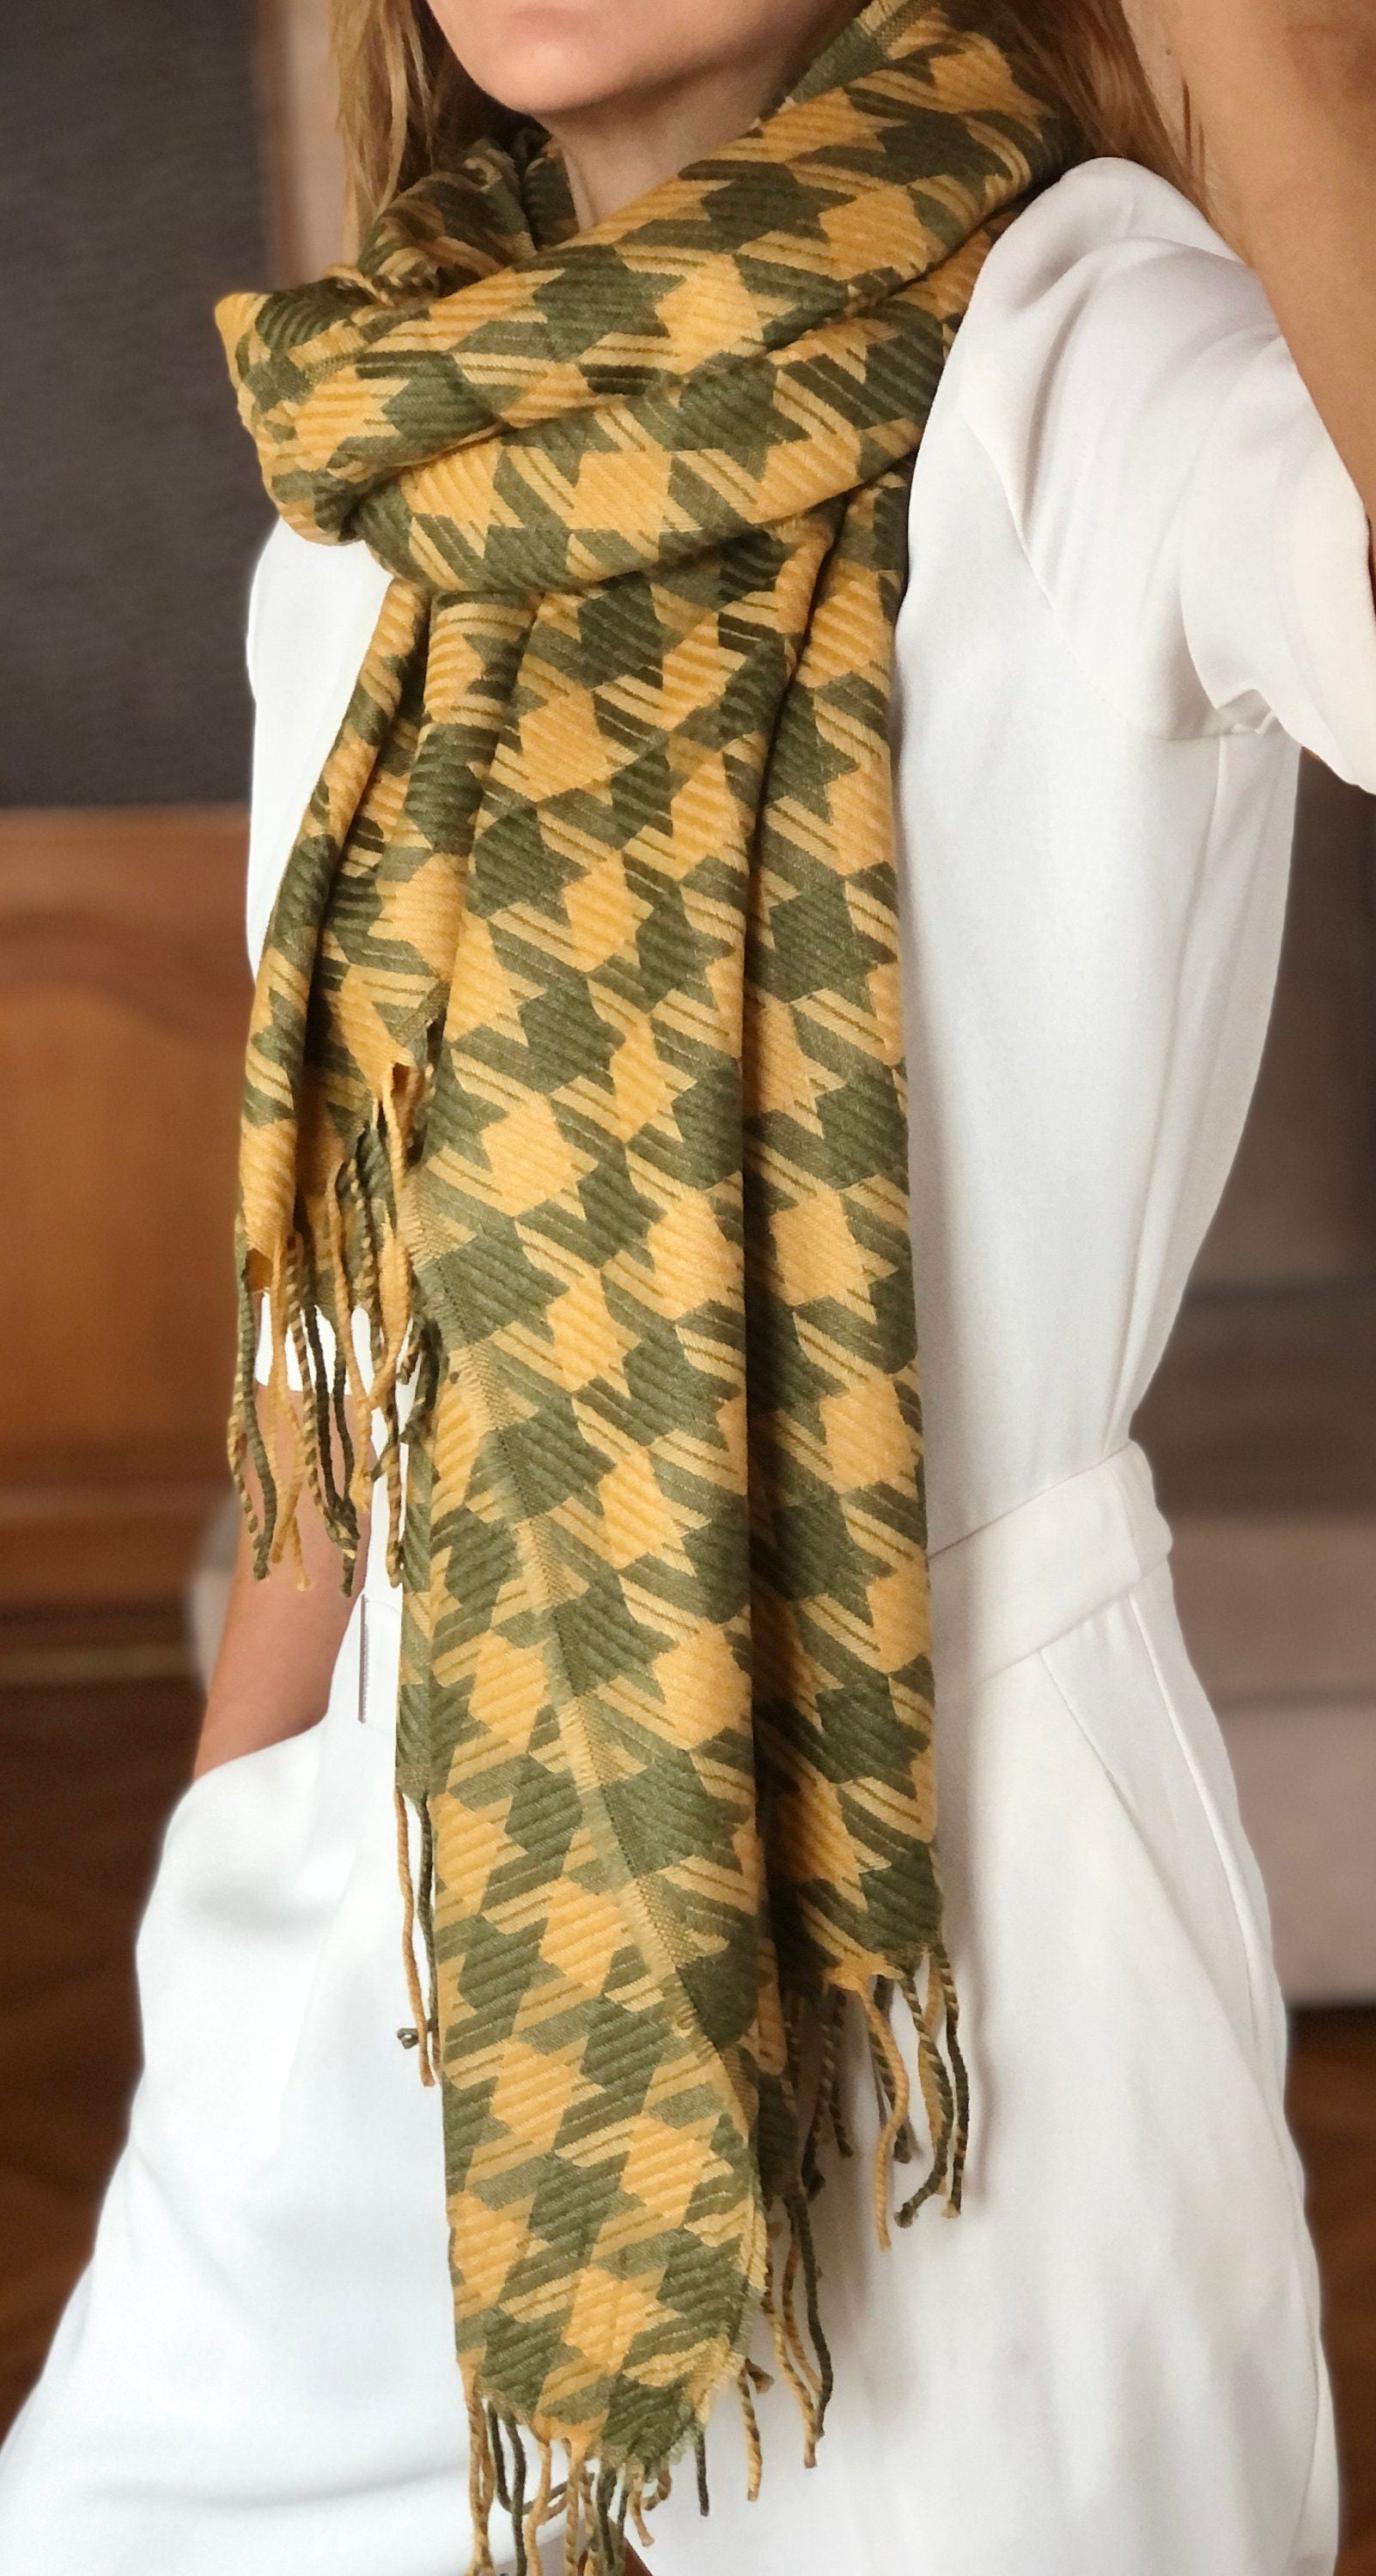 Stay comfortable and warm all season long with this soft and luxurious shawl.